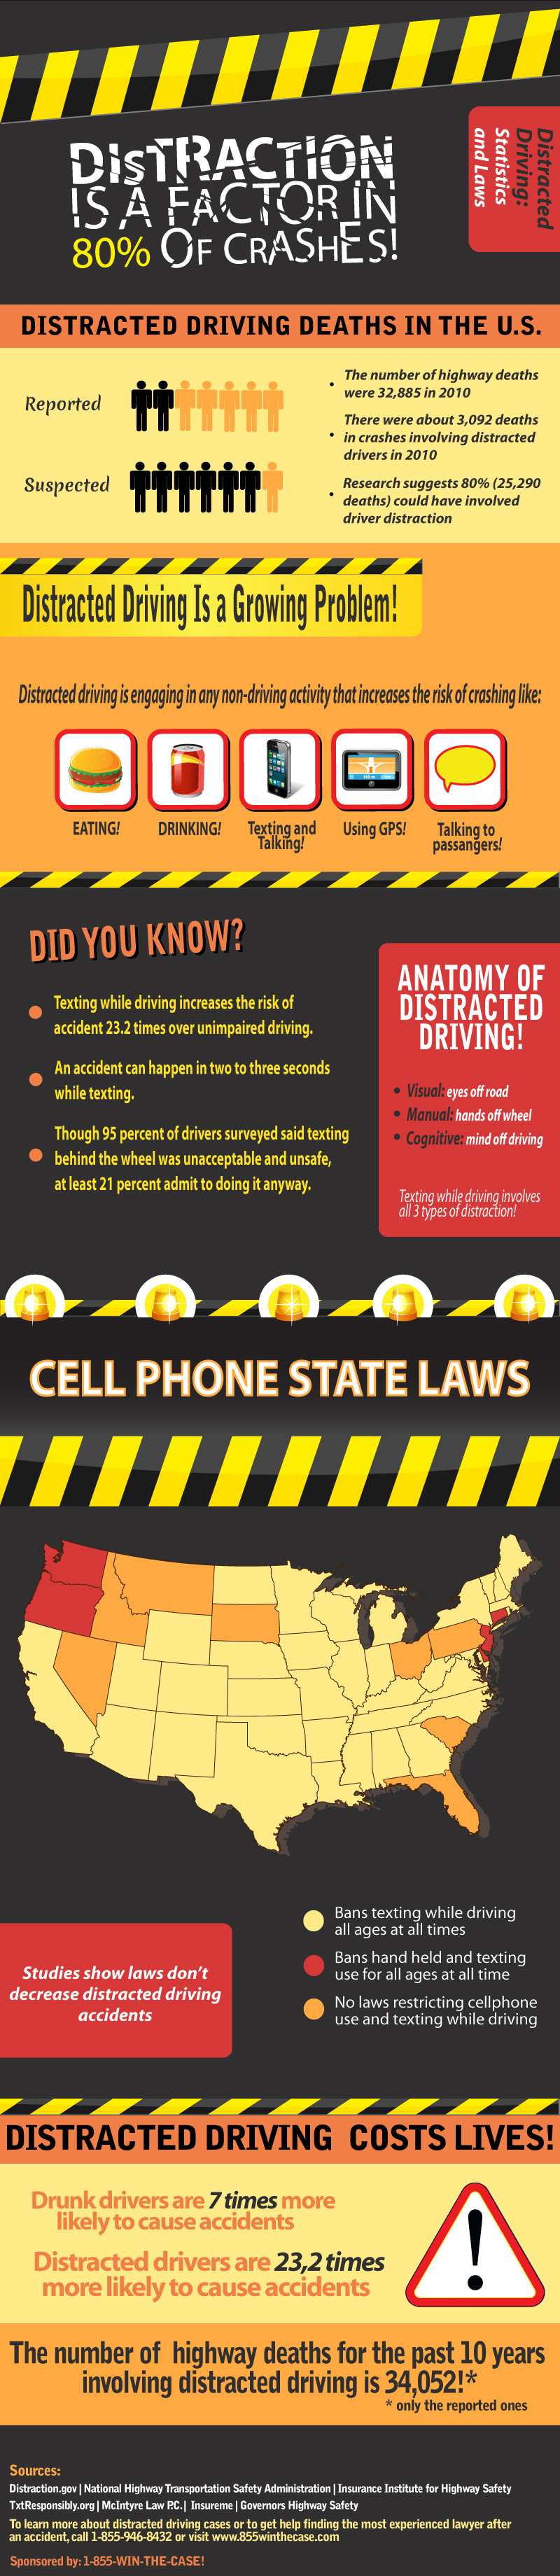 Distracted Driving: Statistics and Laws